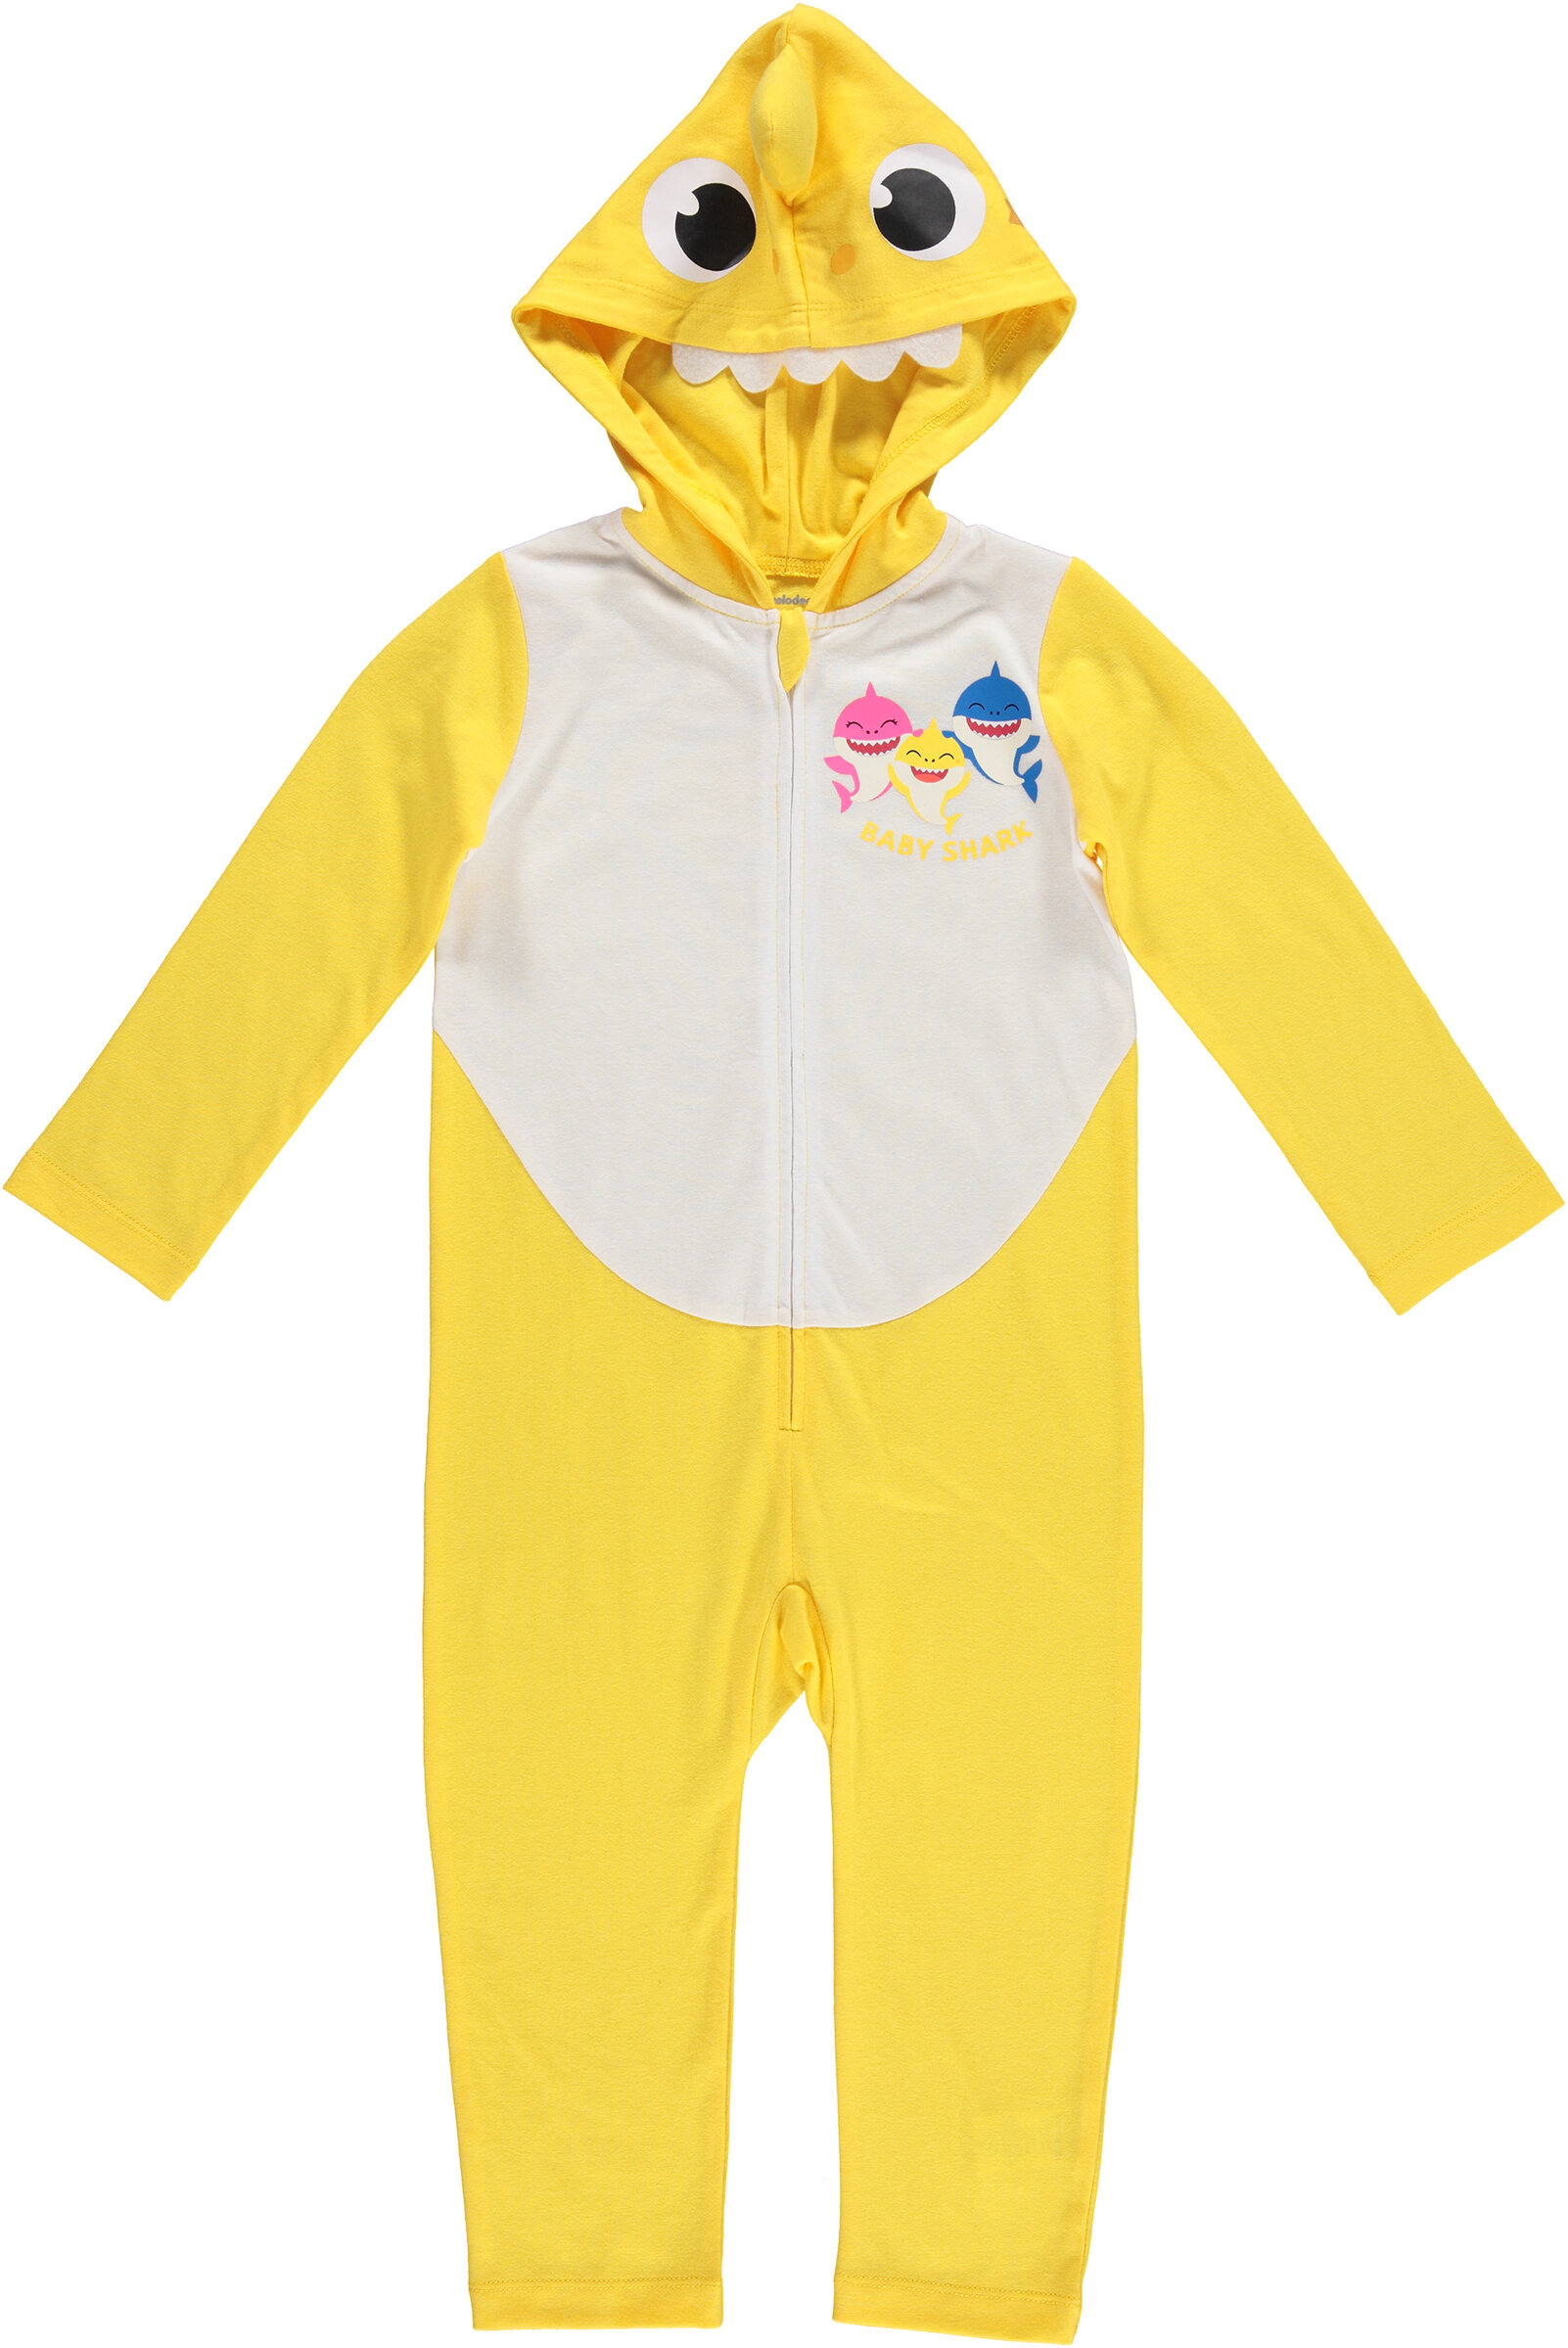 Pinkfong Baby Shark Infant Baby Boys Zip Up Cosplay Costume Coverall Newborn to Little Kid - image 1 of 2